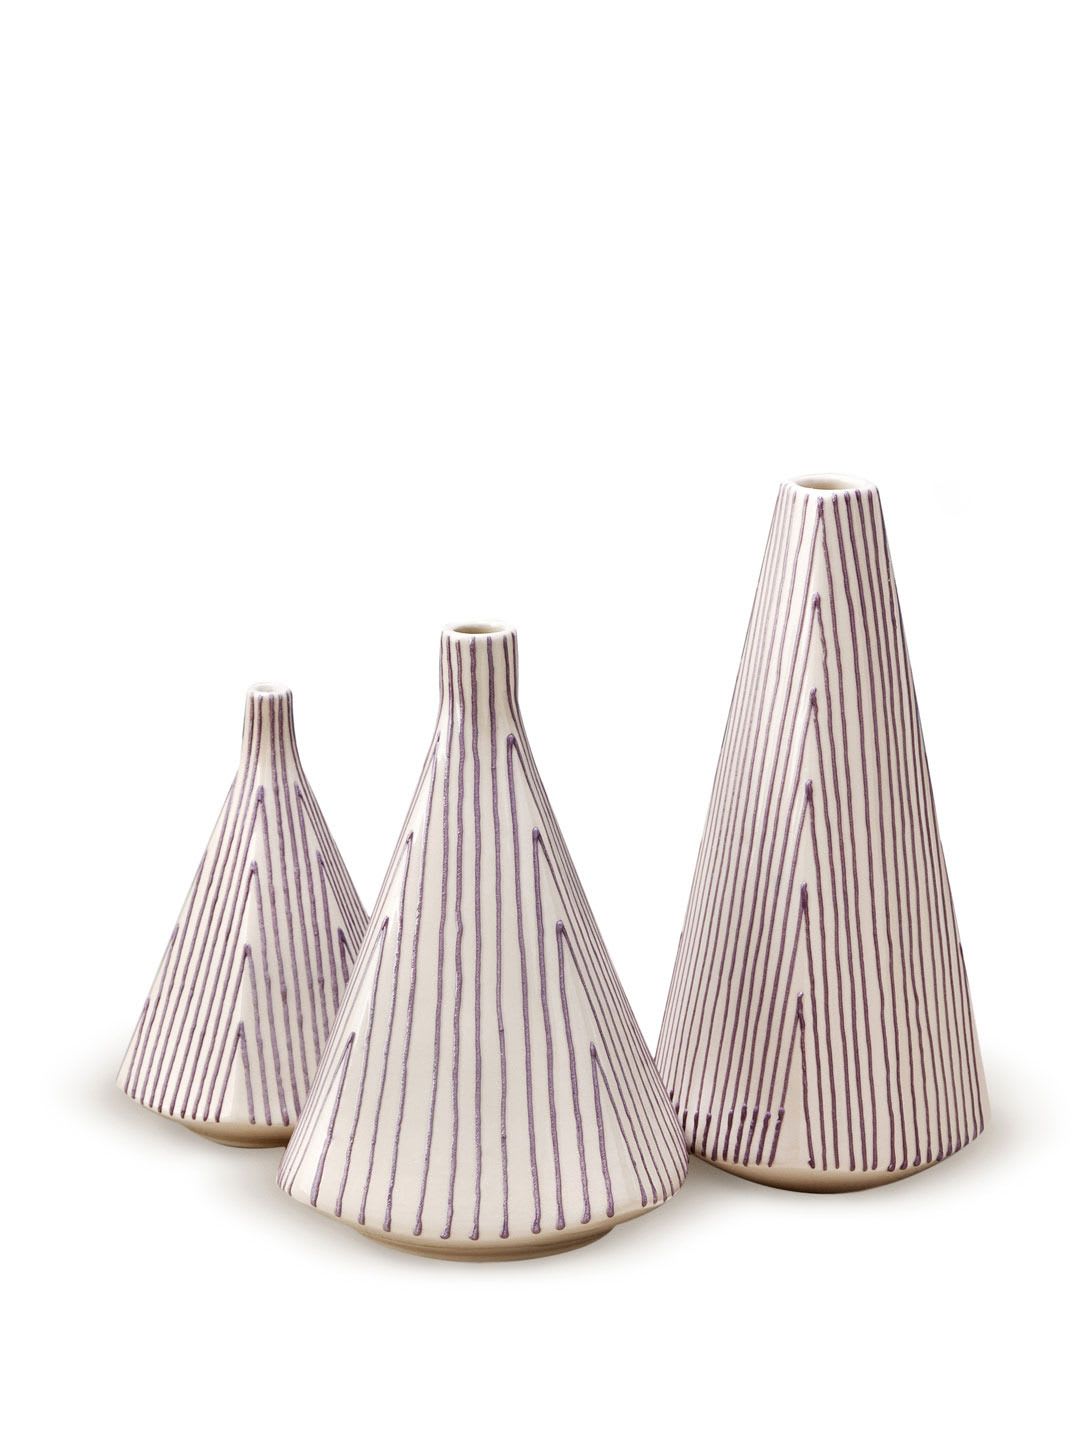 Migny Geometric Vase | Geometric vases, Geometric, Vases and vessels